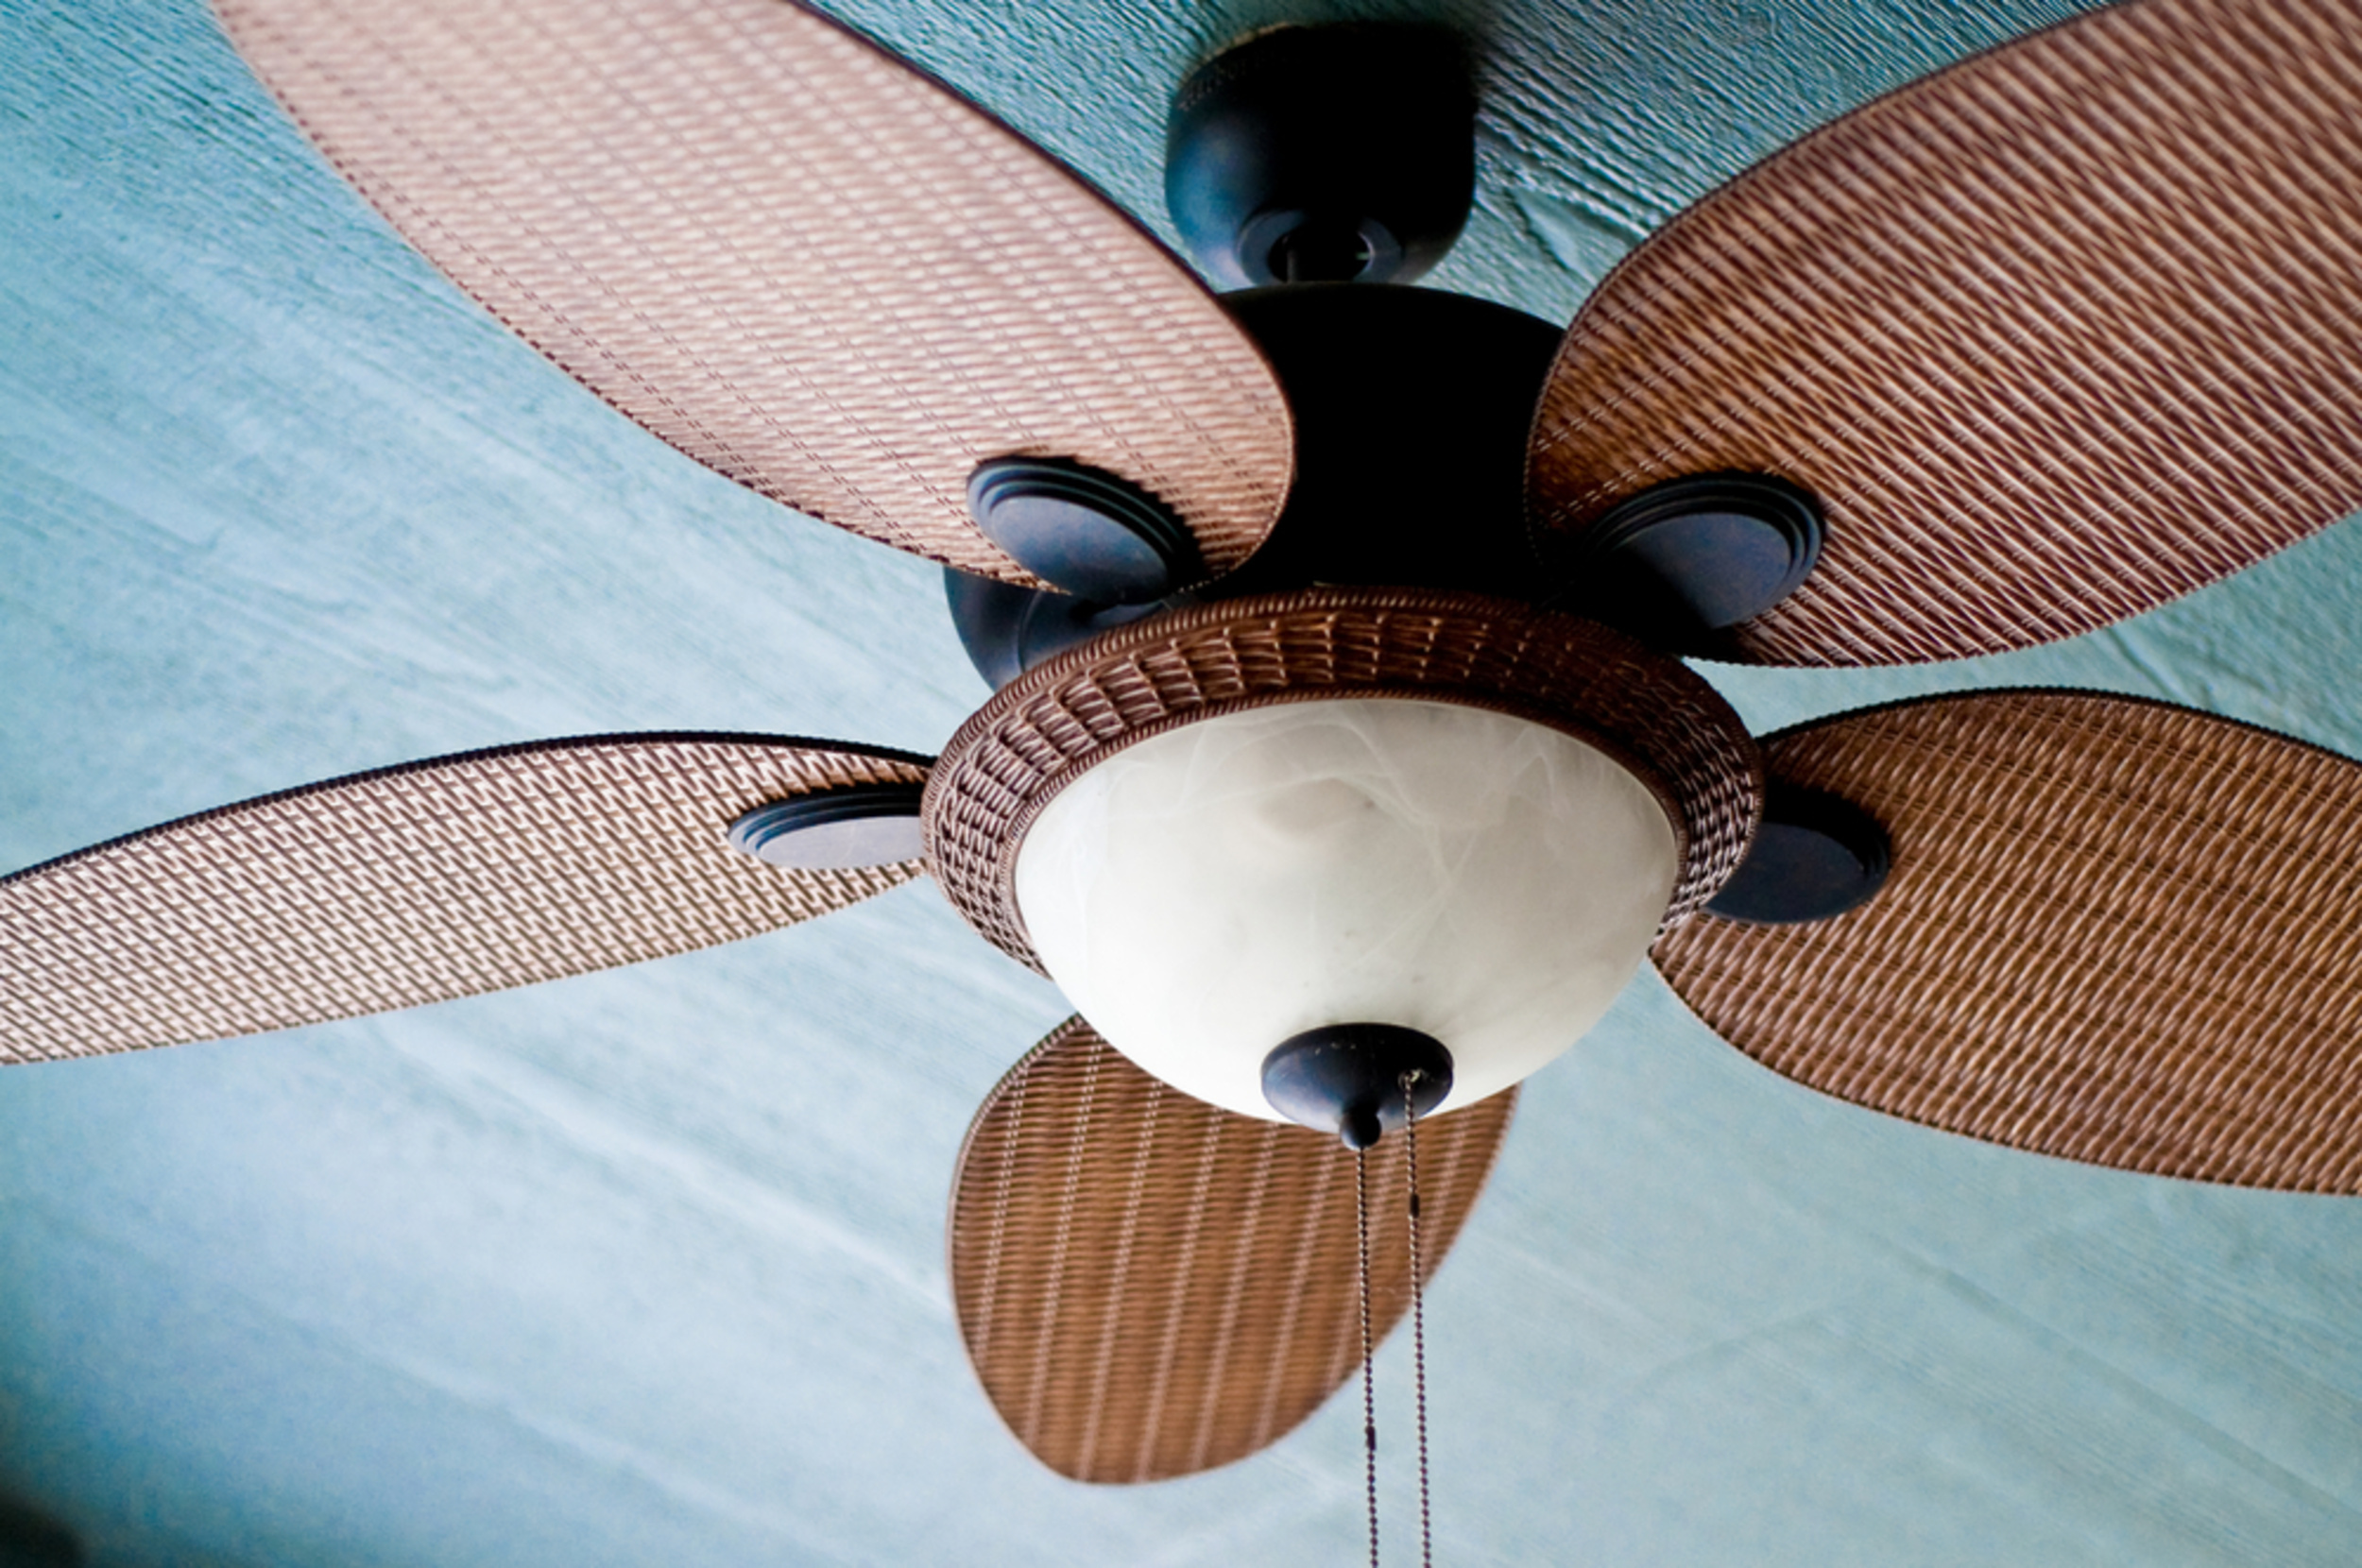 <p>Make sure your ceiling fans are spinning counter-clockwise, ensuring that your spaces stay cooler instead of drawing all the breezy air up toward the ceiling. </p><p>You may also like: <a href='https://www.yardbarker.com/lifestyle/articles/22_meals_perfect_for_following_mediterranean_diet/s1__38389200'>22 meals perfect for following Mediterranean diet</a></p>